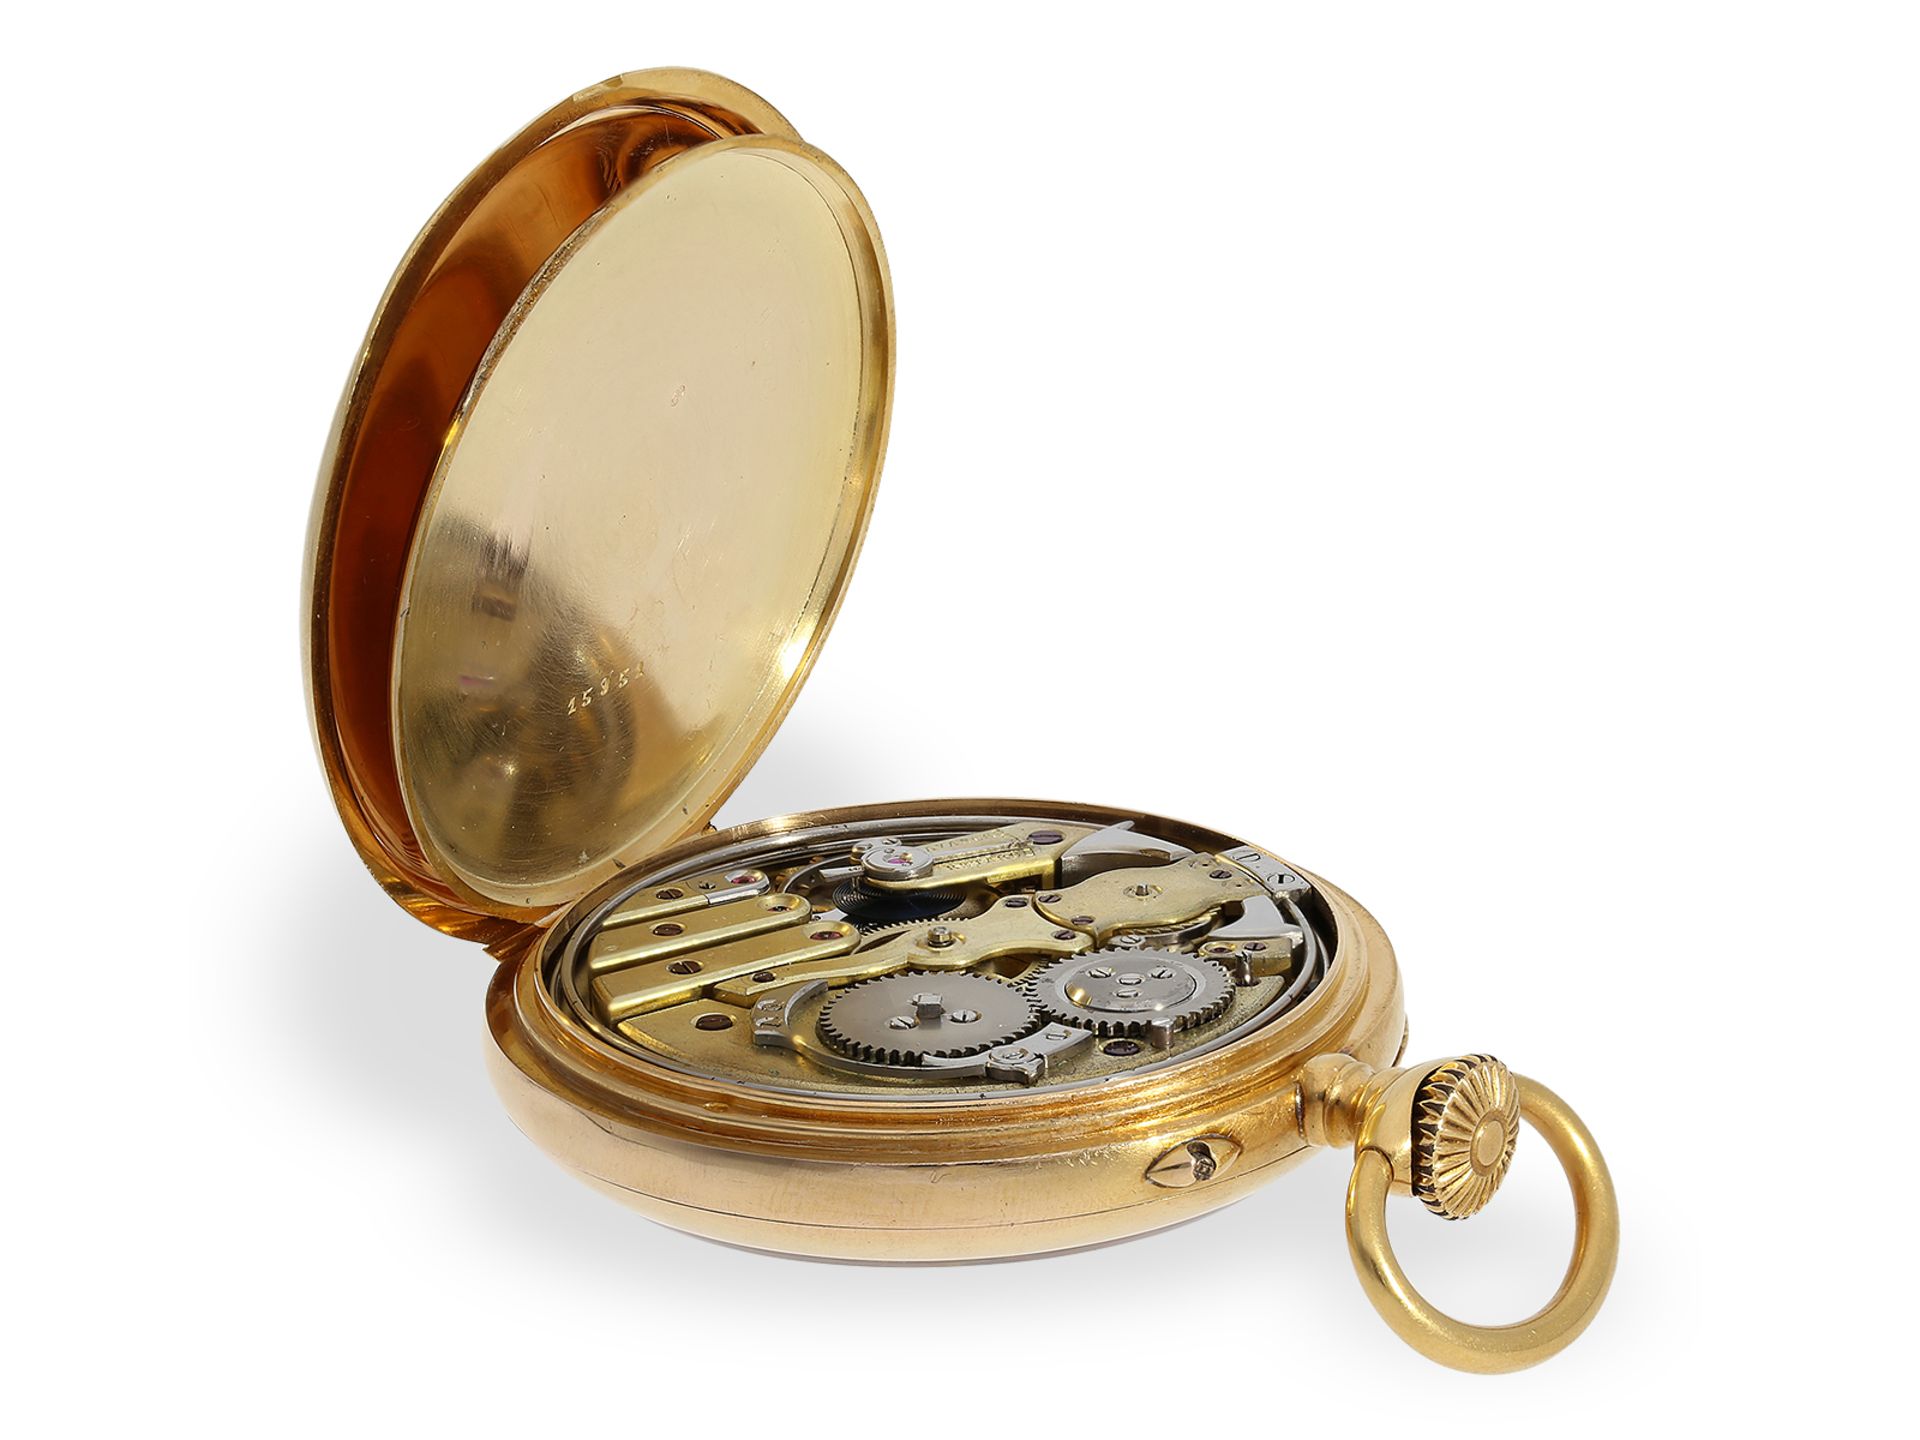 Fine 18K precision pocket watch with quarter repeater, probably Le Coultre, ca. 1900 - Image 3 of 5